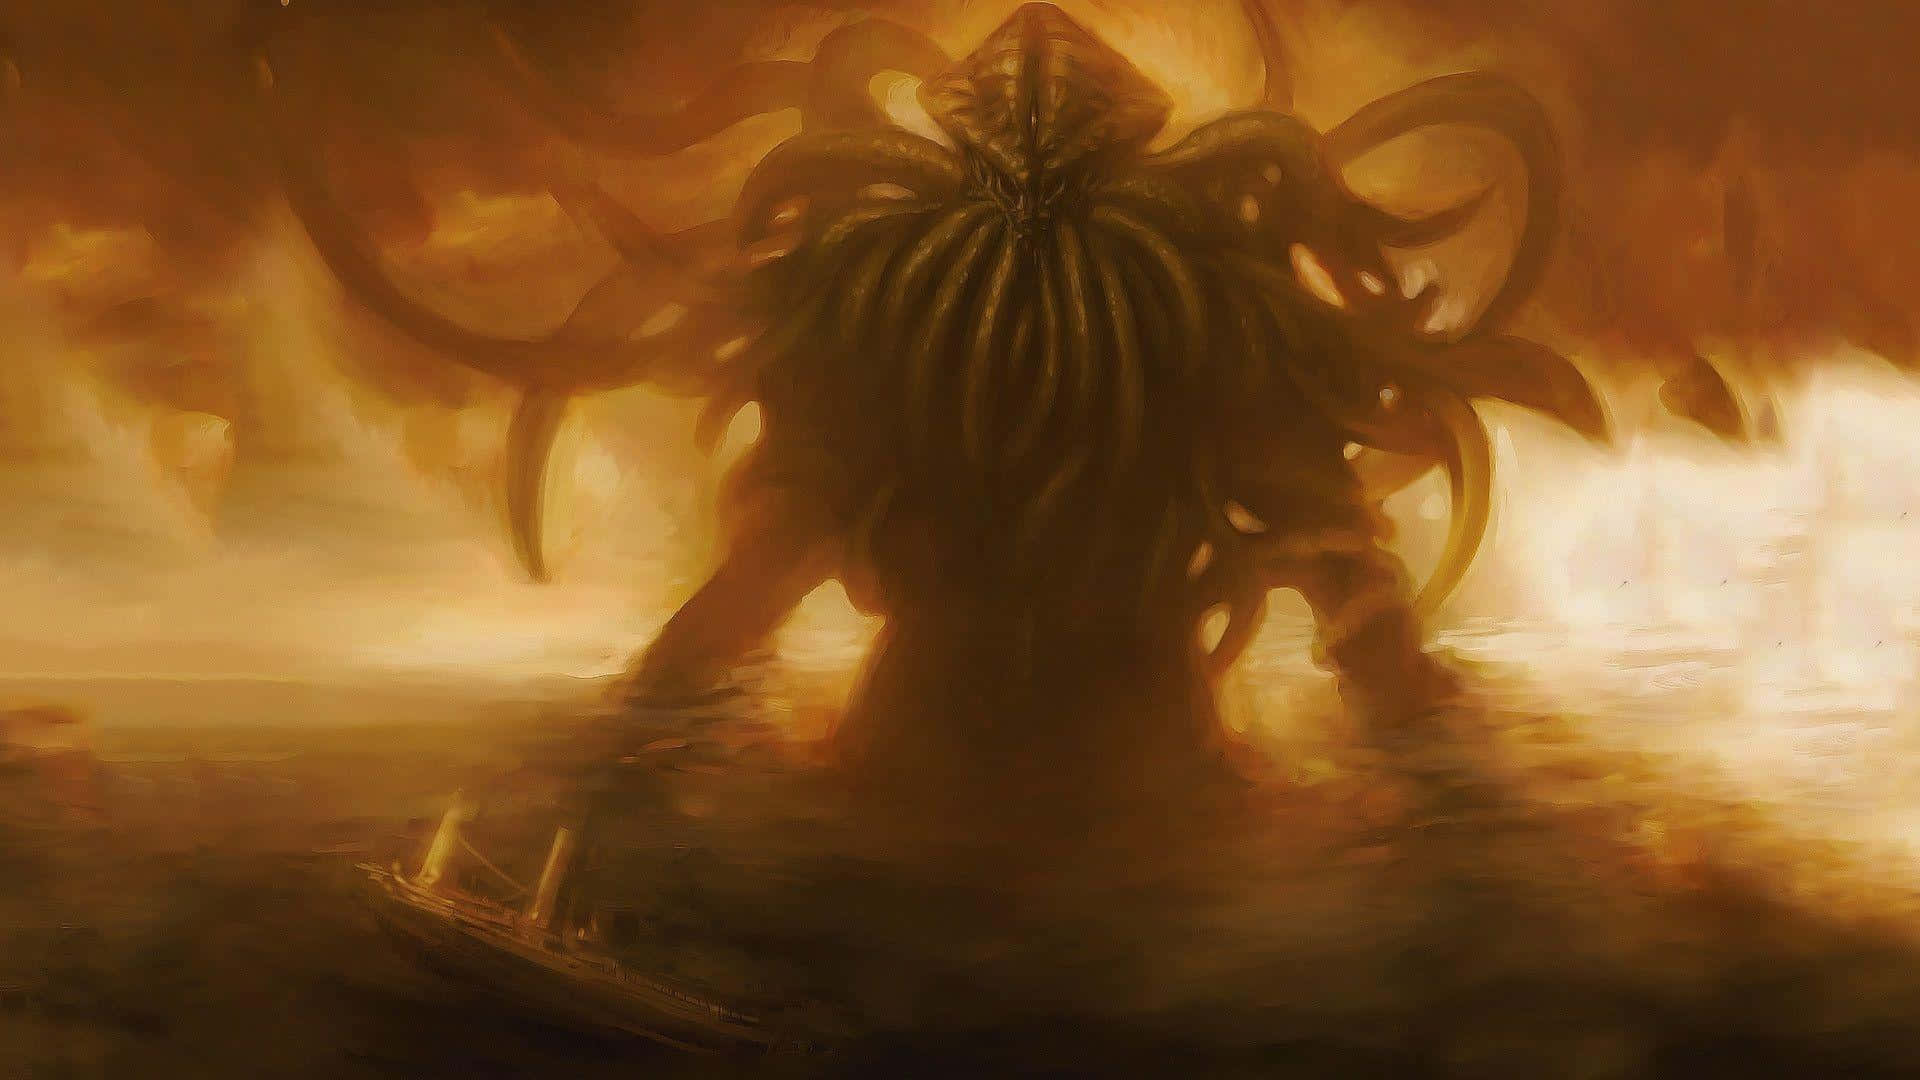 Embrace the Unknown in the Work of H.P. Lovecraft